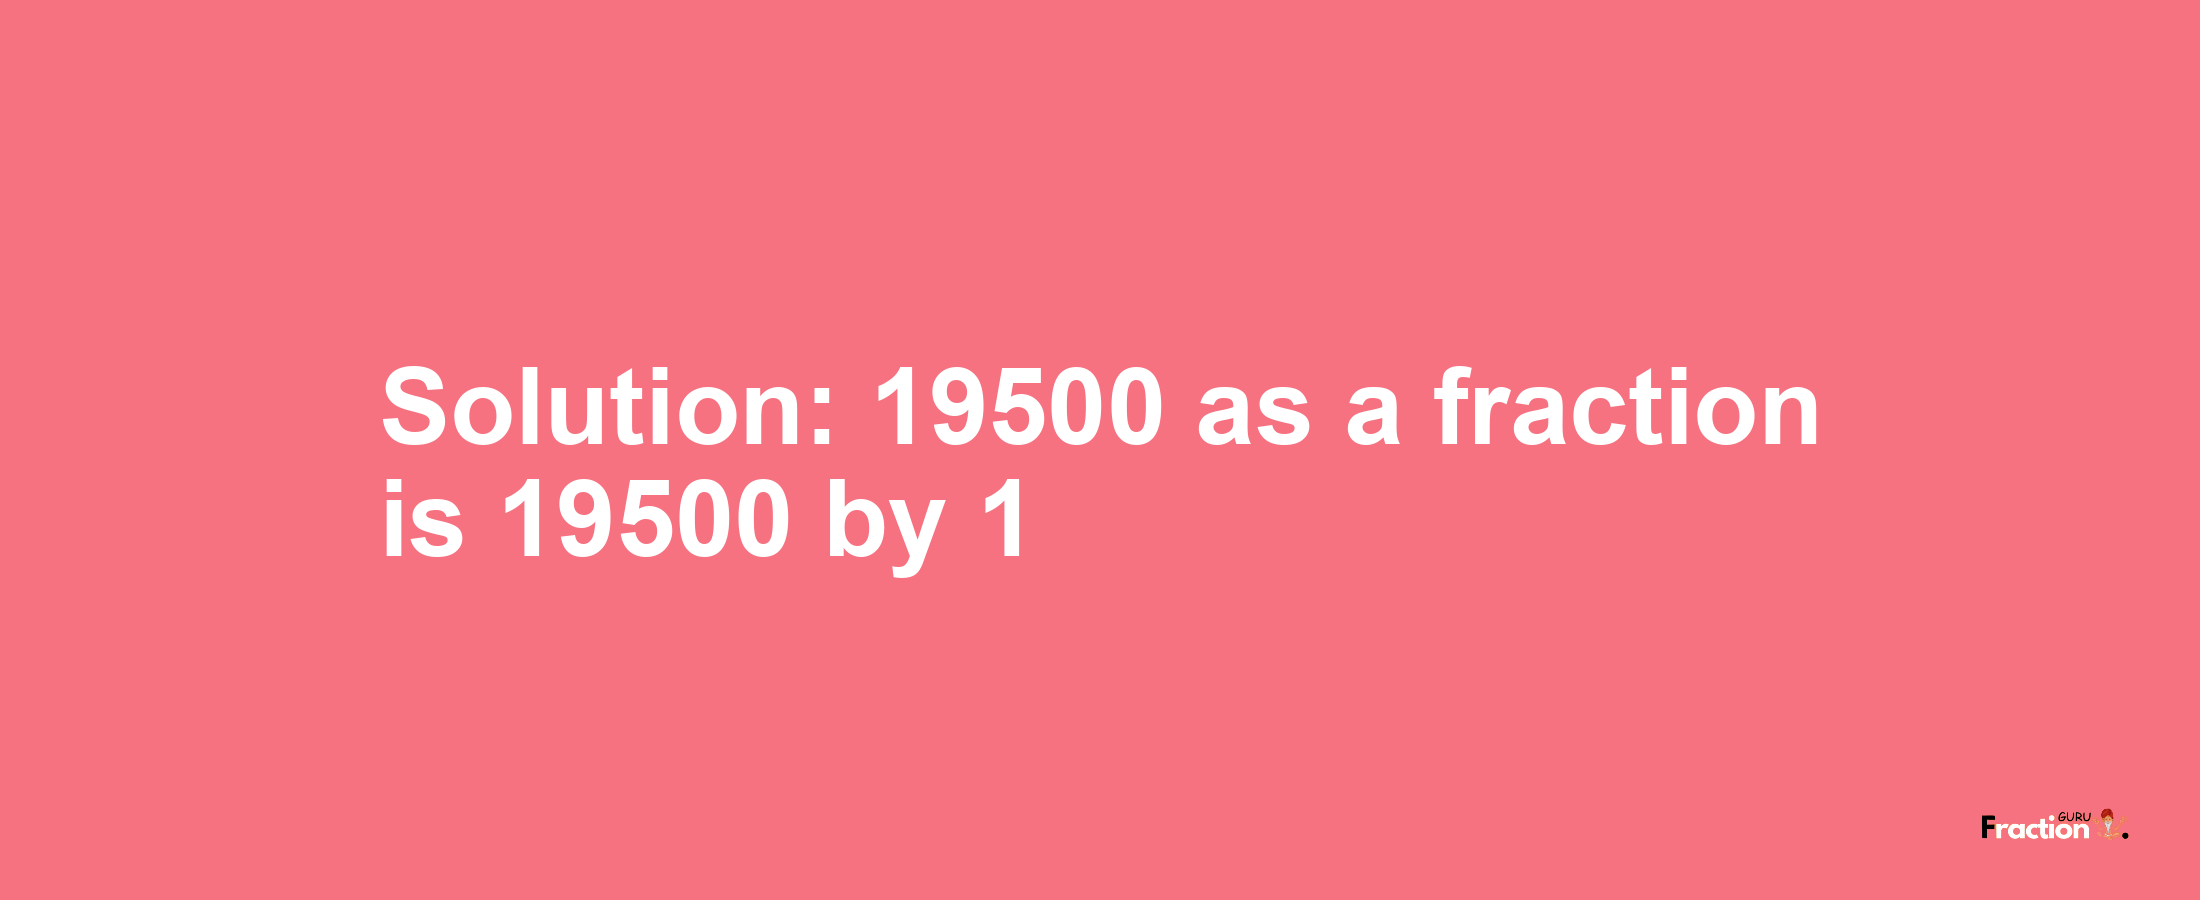 Solution:19500 as a fraction is 19500/1